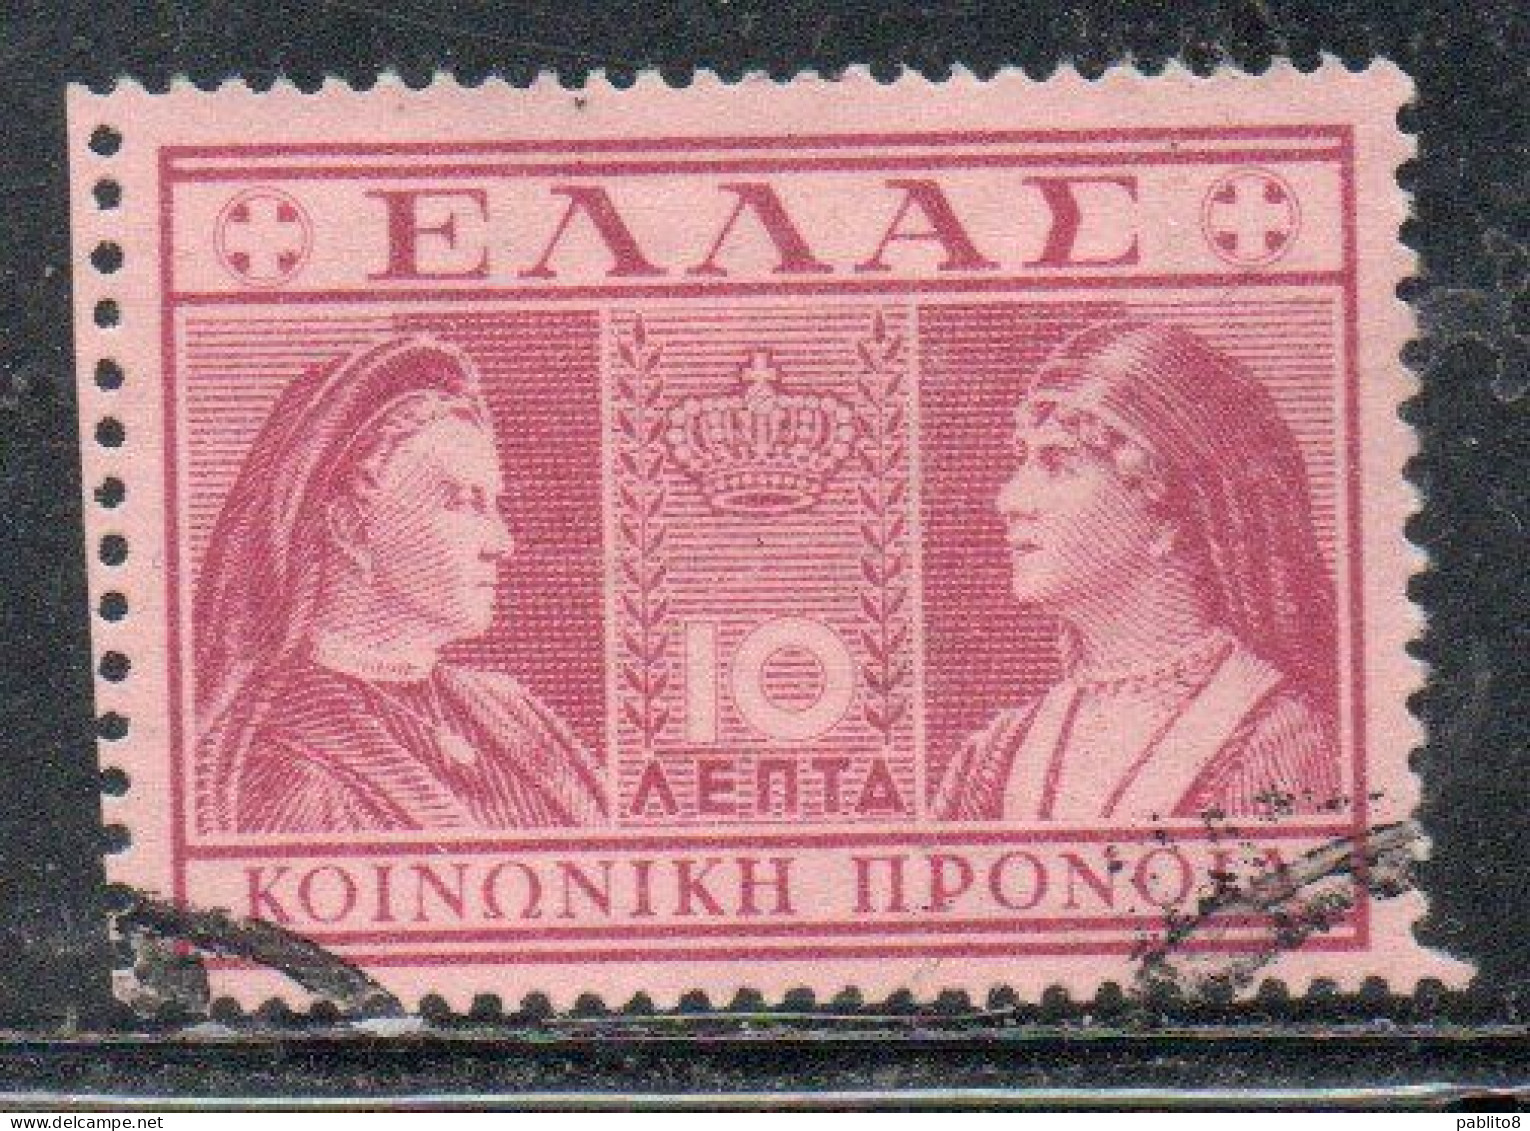 GREECE GRECIA HELLAS 1939 POSTAL TAX STAMPS QUEENS OLG AND SOPHIA 10L USED USATO OBLITERE' - Revenue Stamps